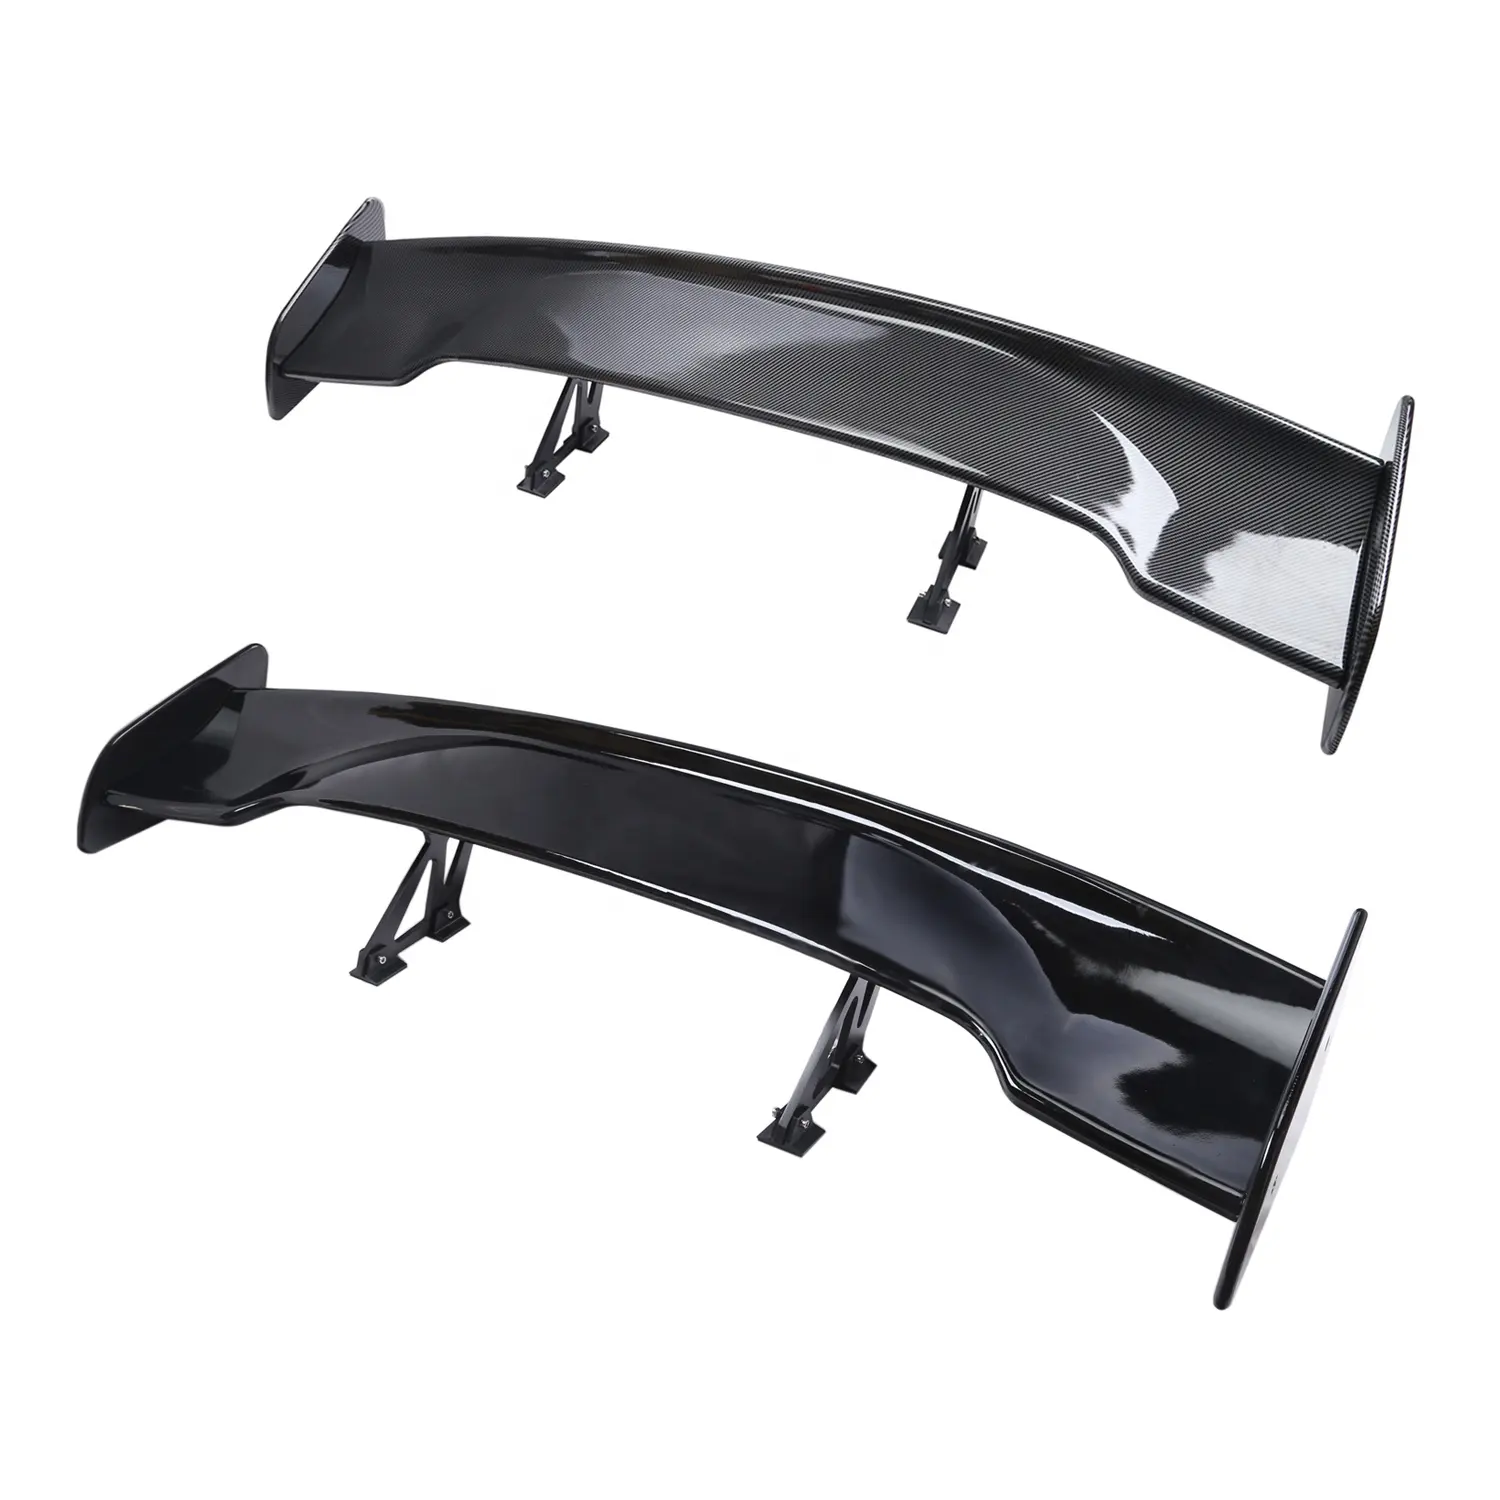 DTouch Car Spoiler Universal ABS Material Rear Wing Spoiler Glossy Black GT High Bracket Racing Rear Wing